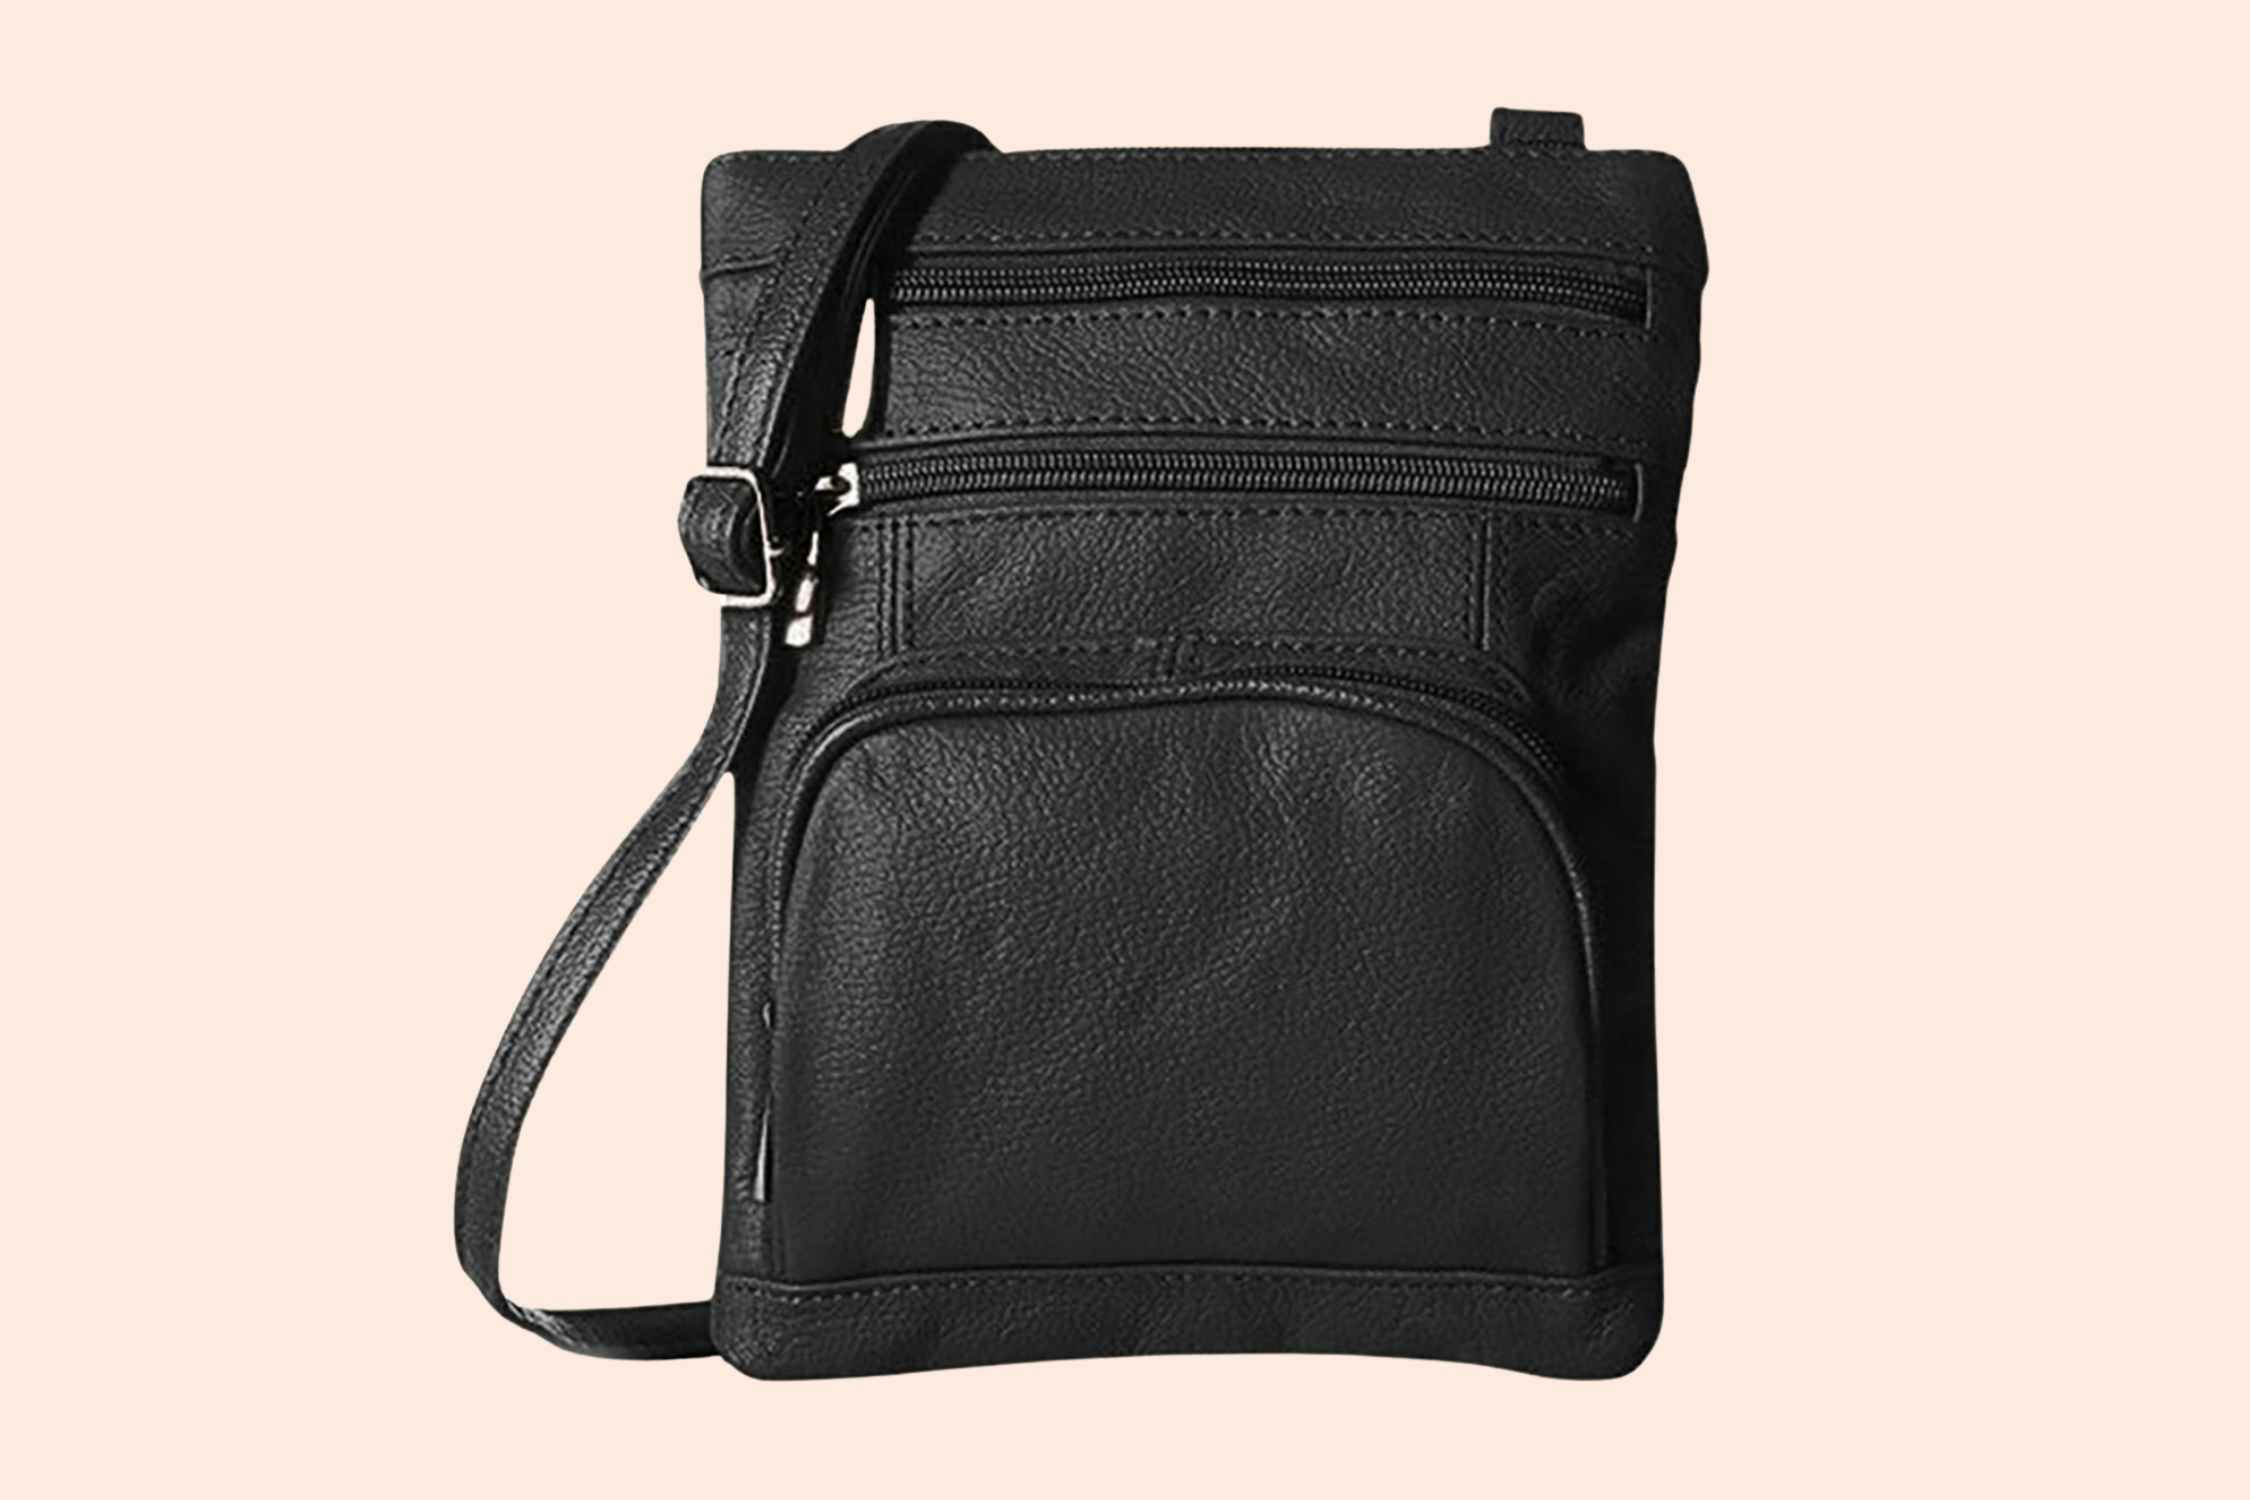 Leather Crossbody Bag, Only $14 at UntilGone